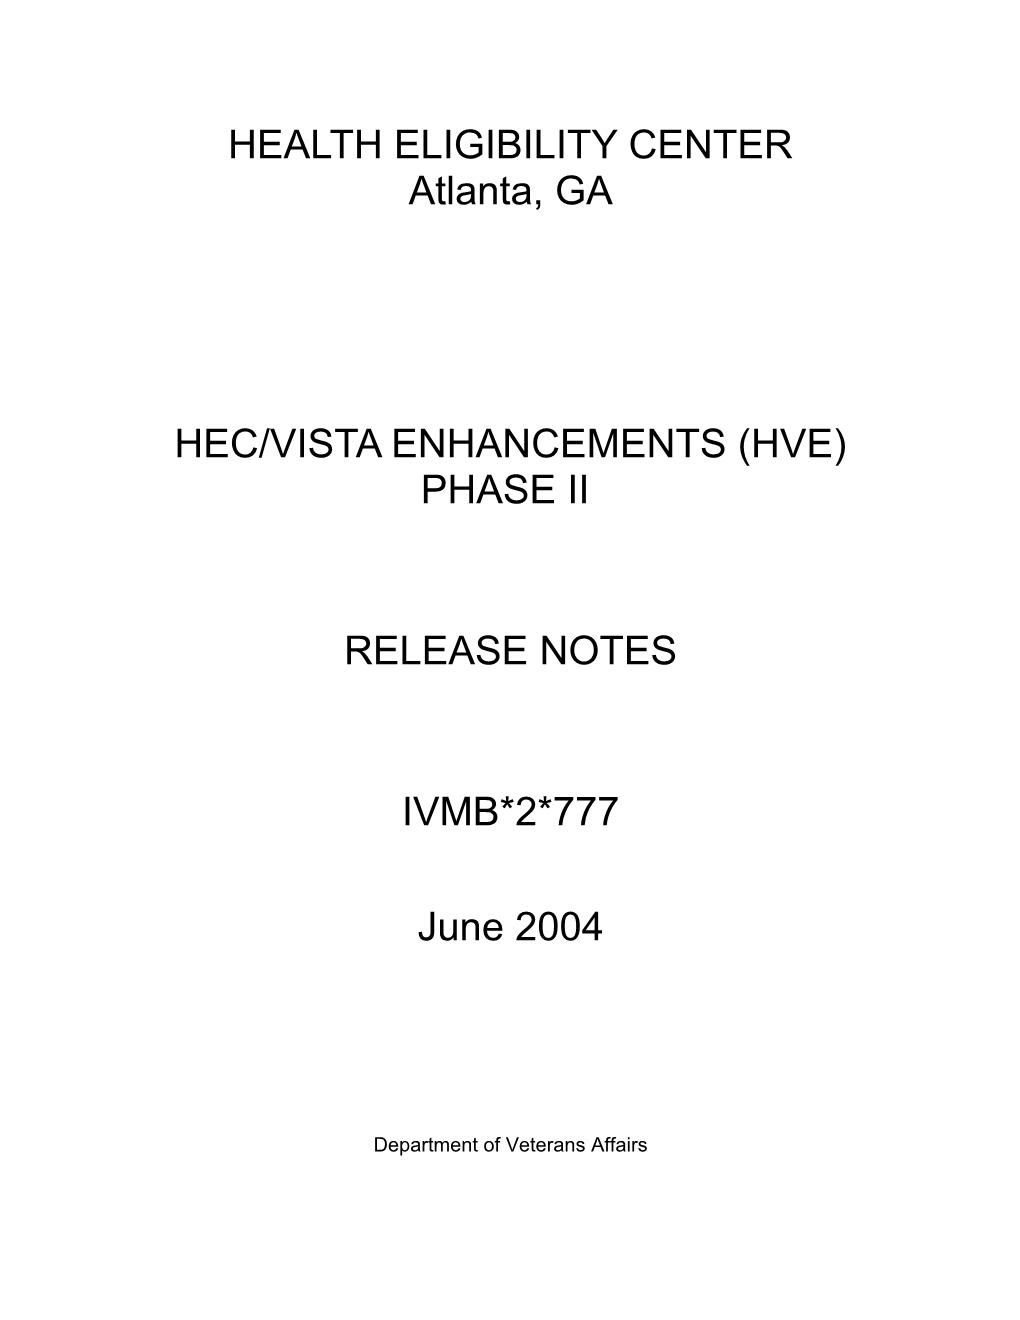 HVE Phase 2 Release Notes